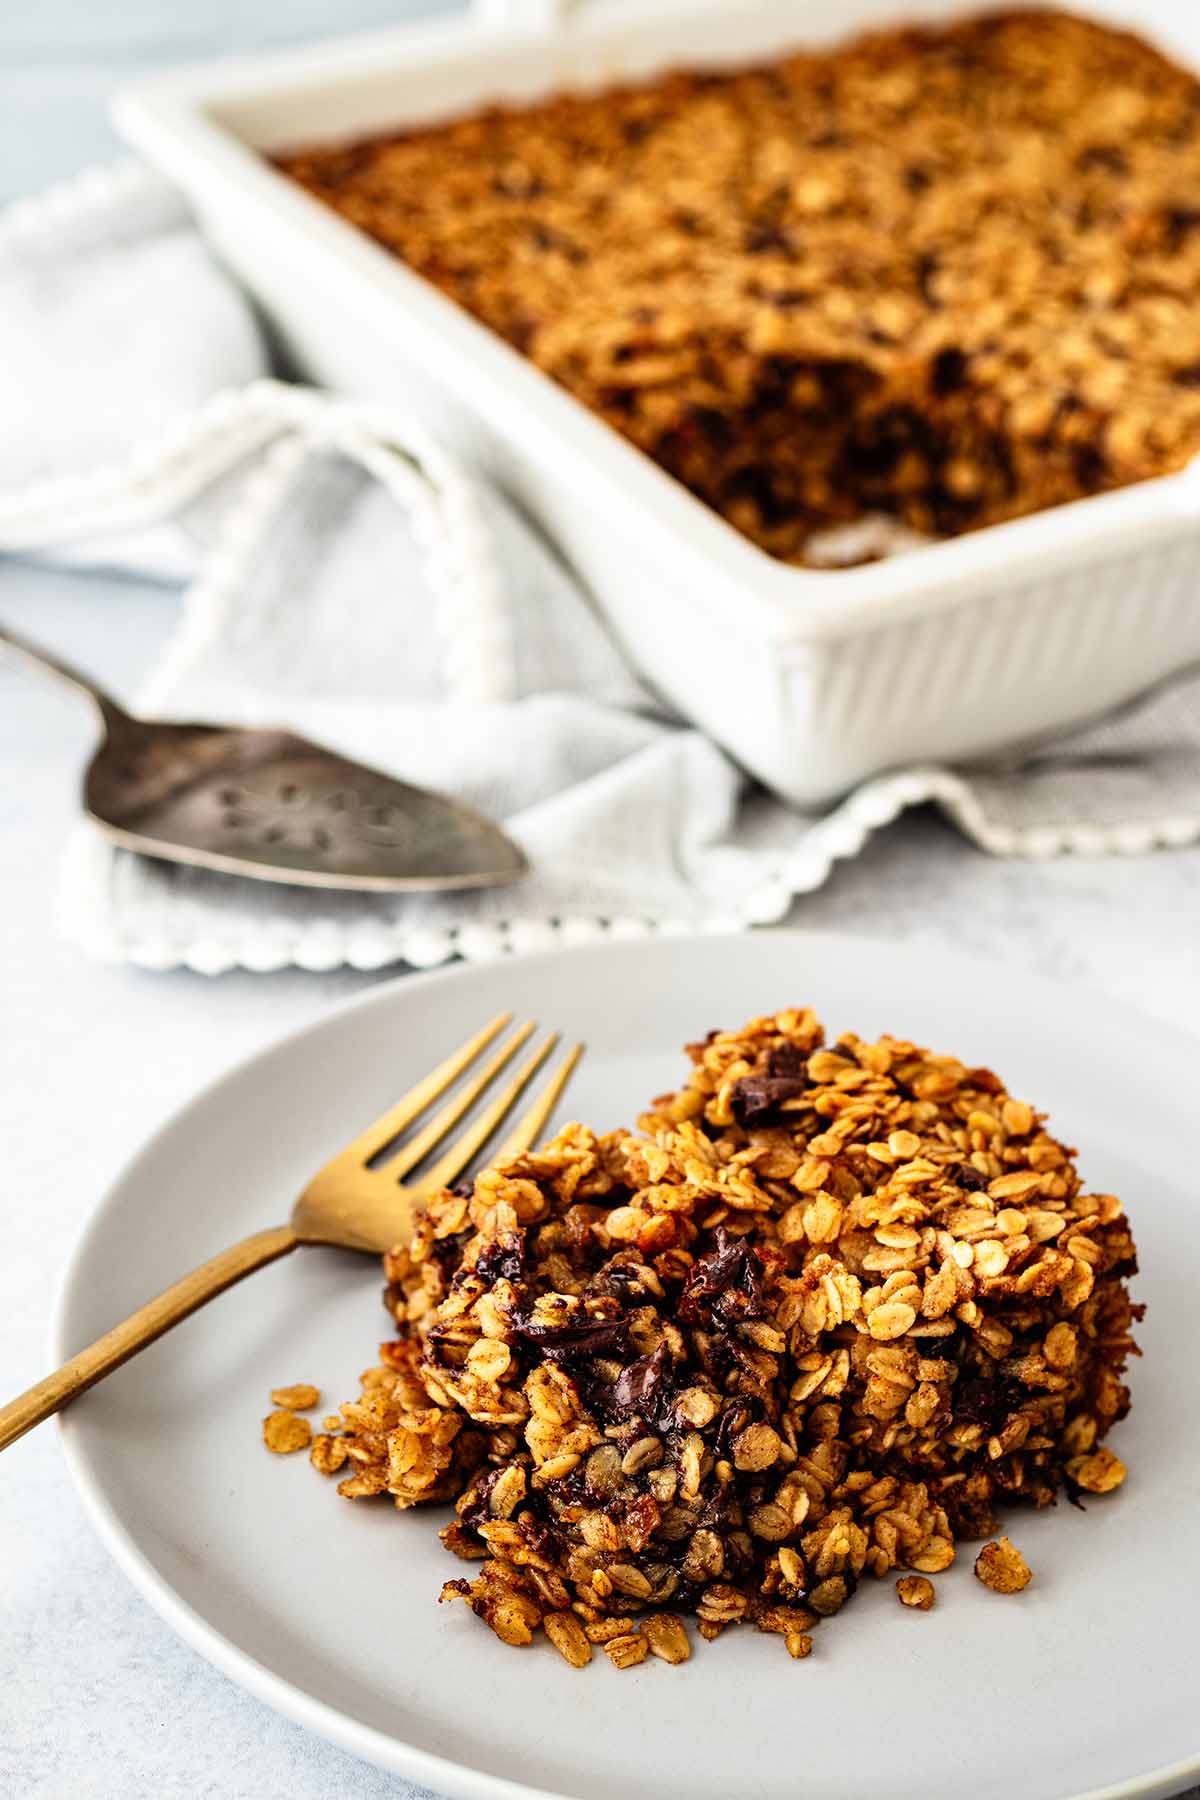 Serving of chocolate chip baked oatmeal on a light grey plate with a gold fork.